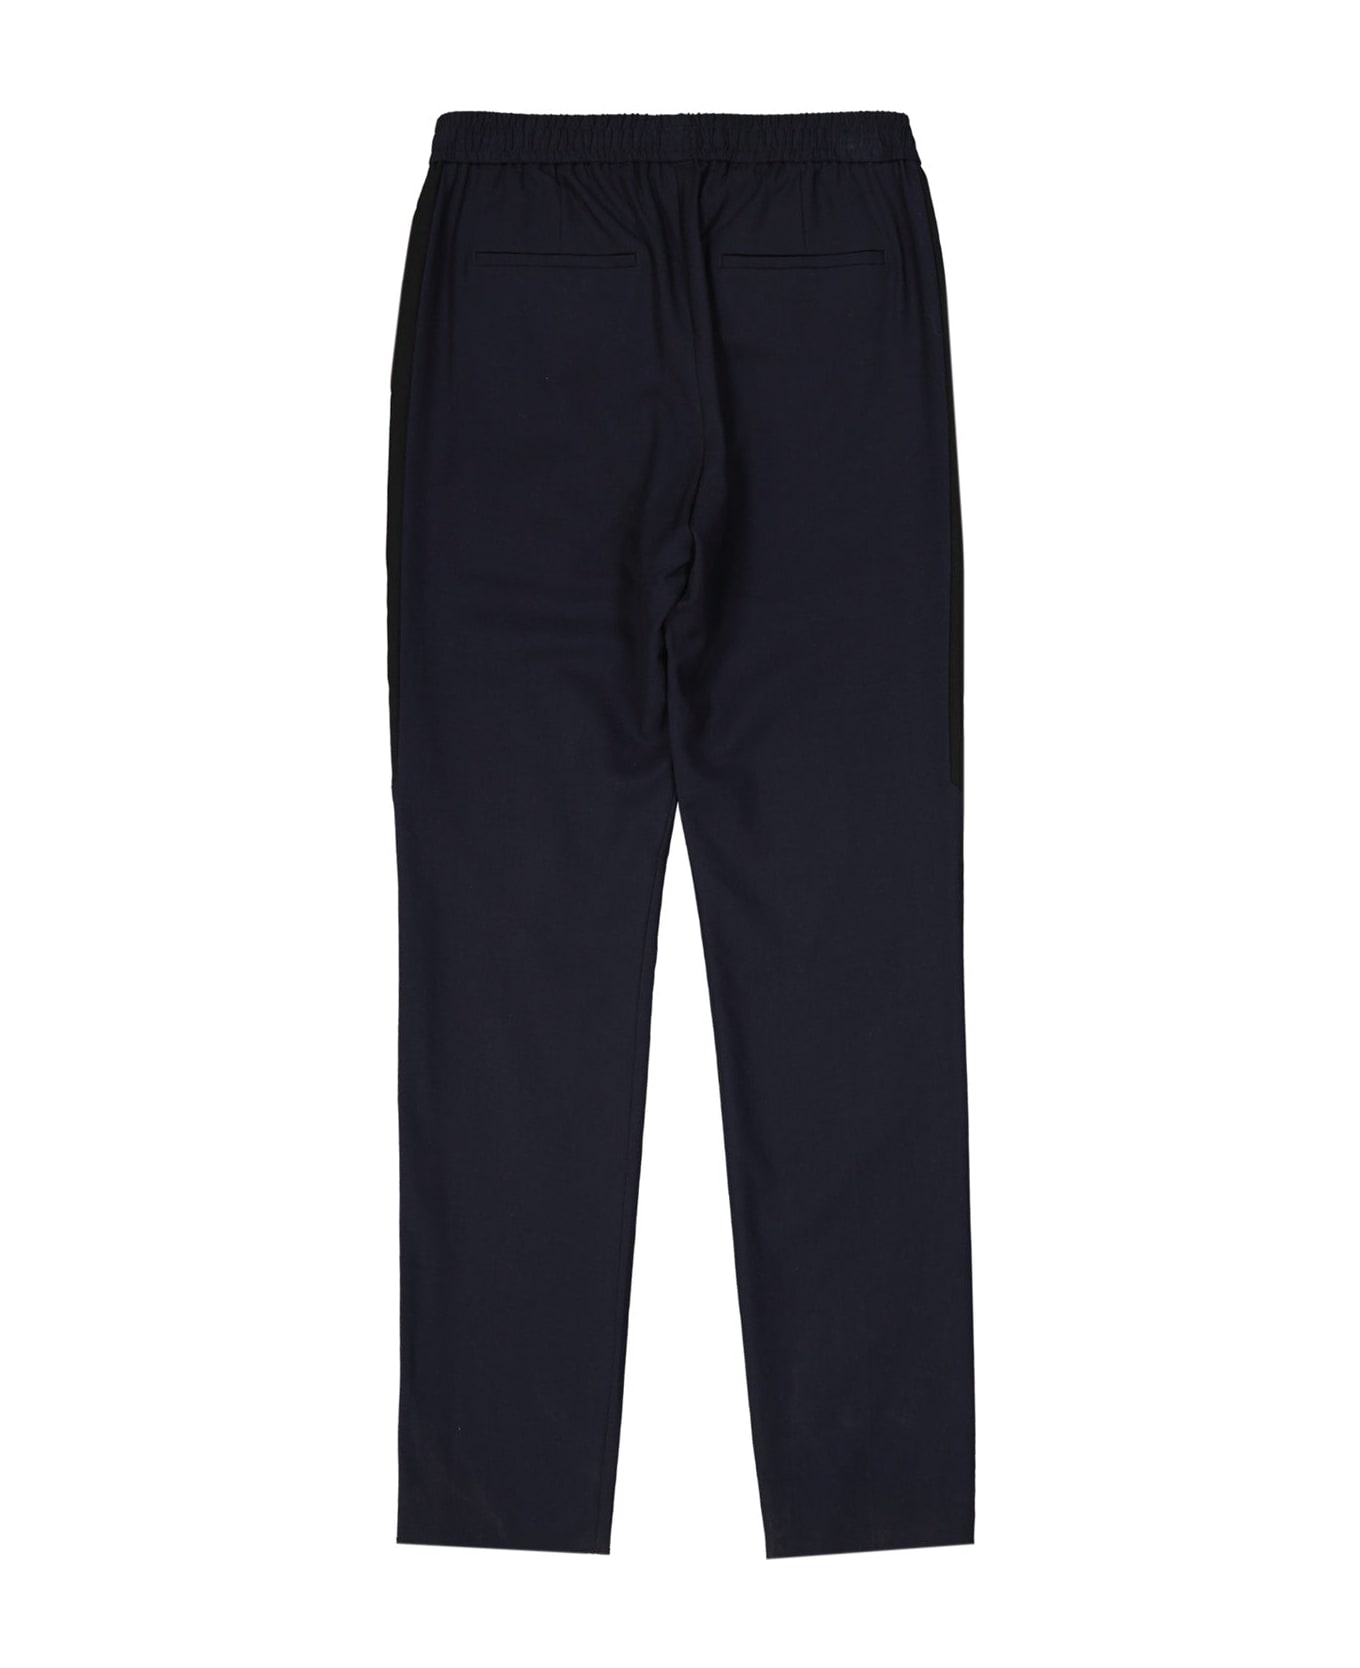 Givenchy Striped Side Panel Wool Trousers - Blue ボトムス